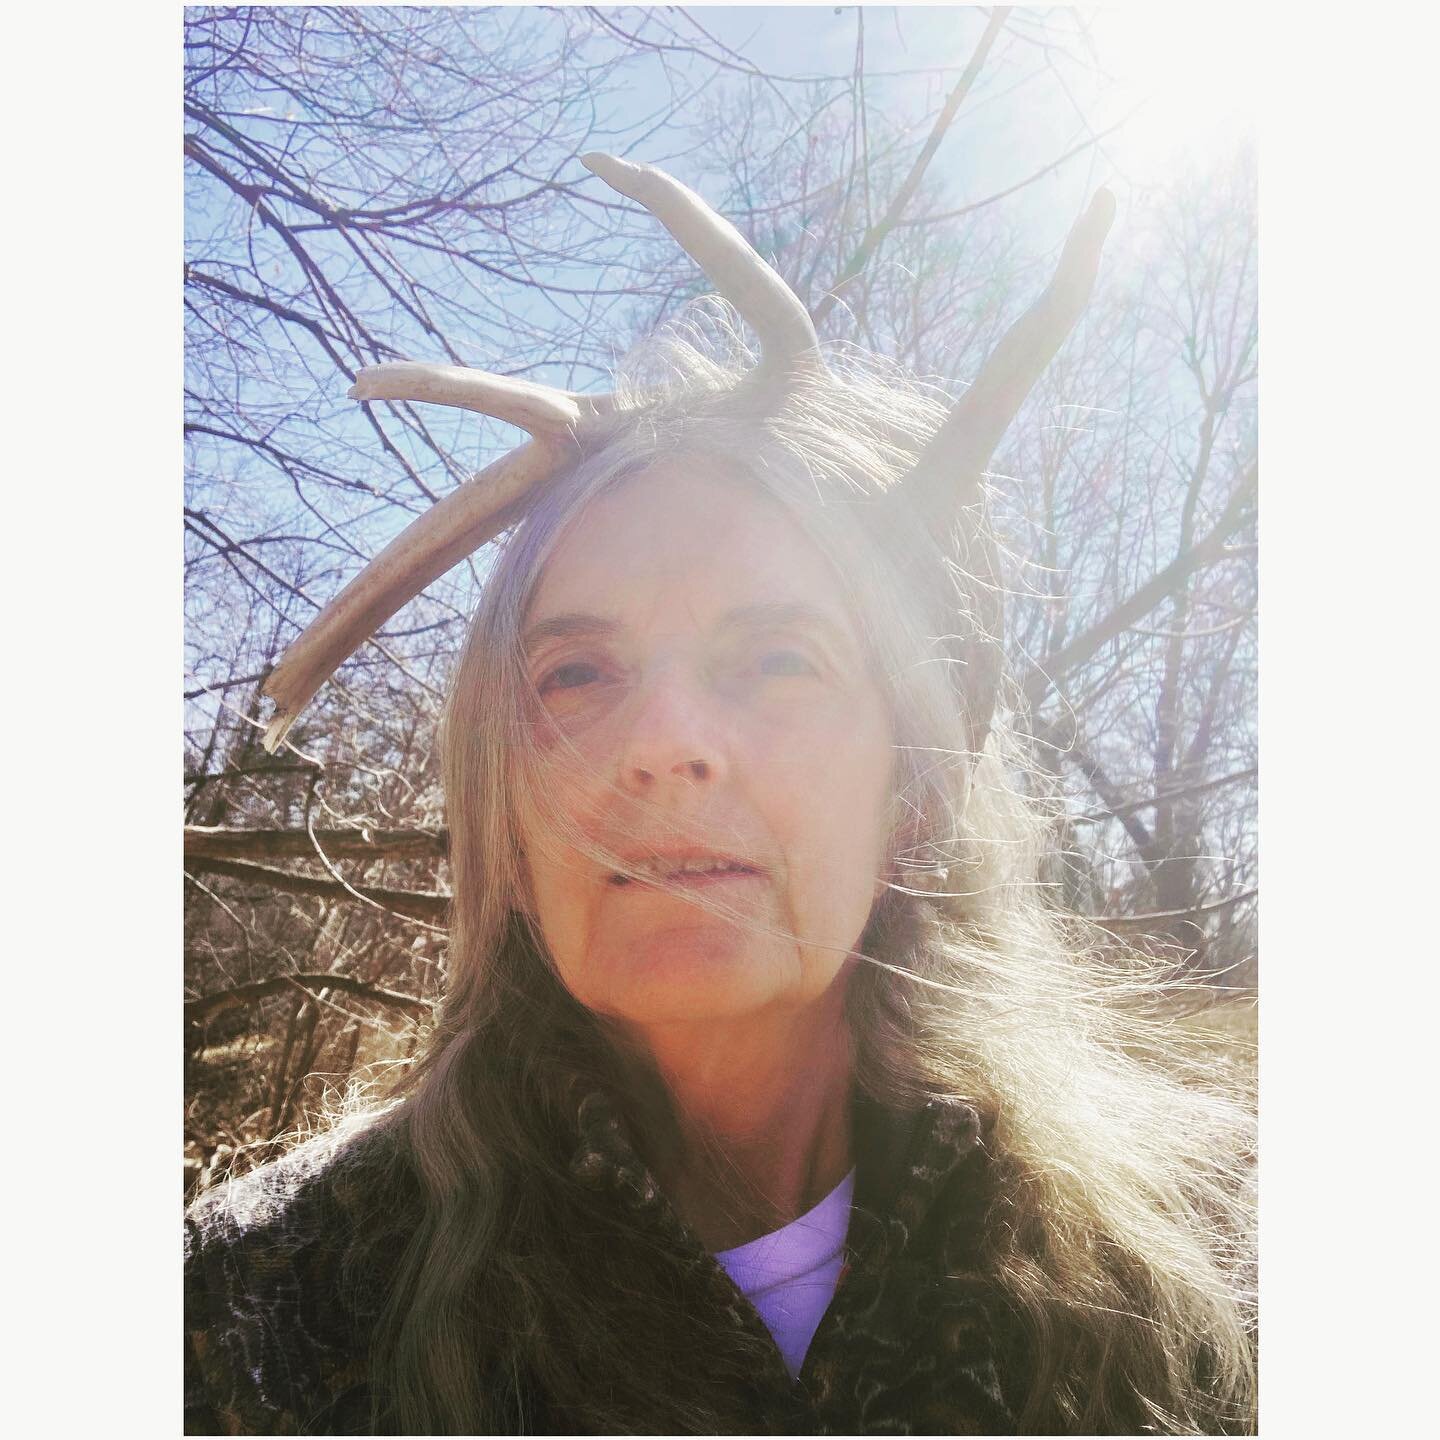 We talk every day. Today:

What are you doing?
Walking the woods. 
I hear rustling. You ok?
Laughter. 
Yes! I&rsquo;m just playing with these antlers I found. A half set, you know, one side?

An hour later my phone buzzes. It&rsquo;s this photo. My m